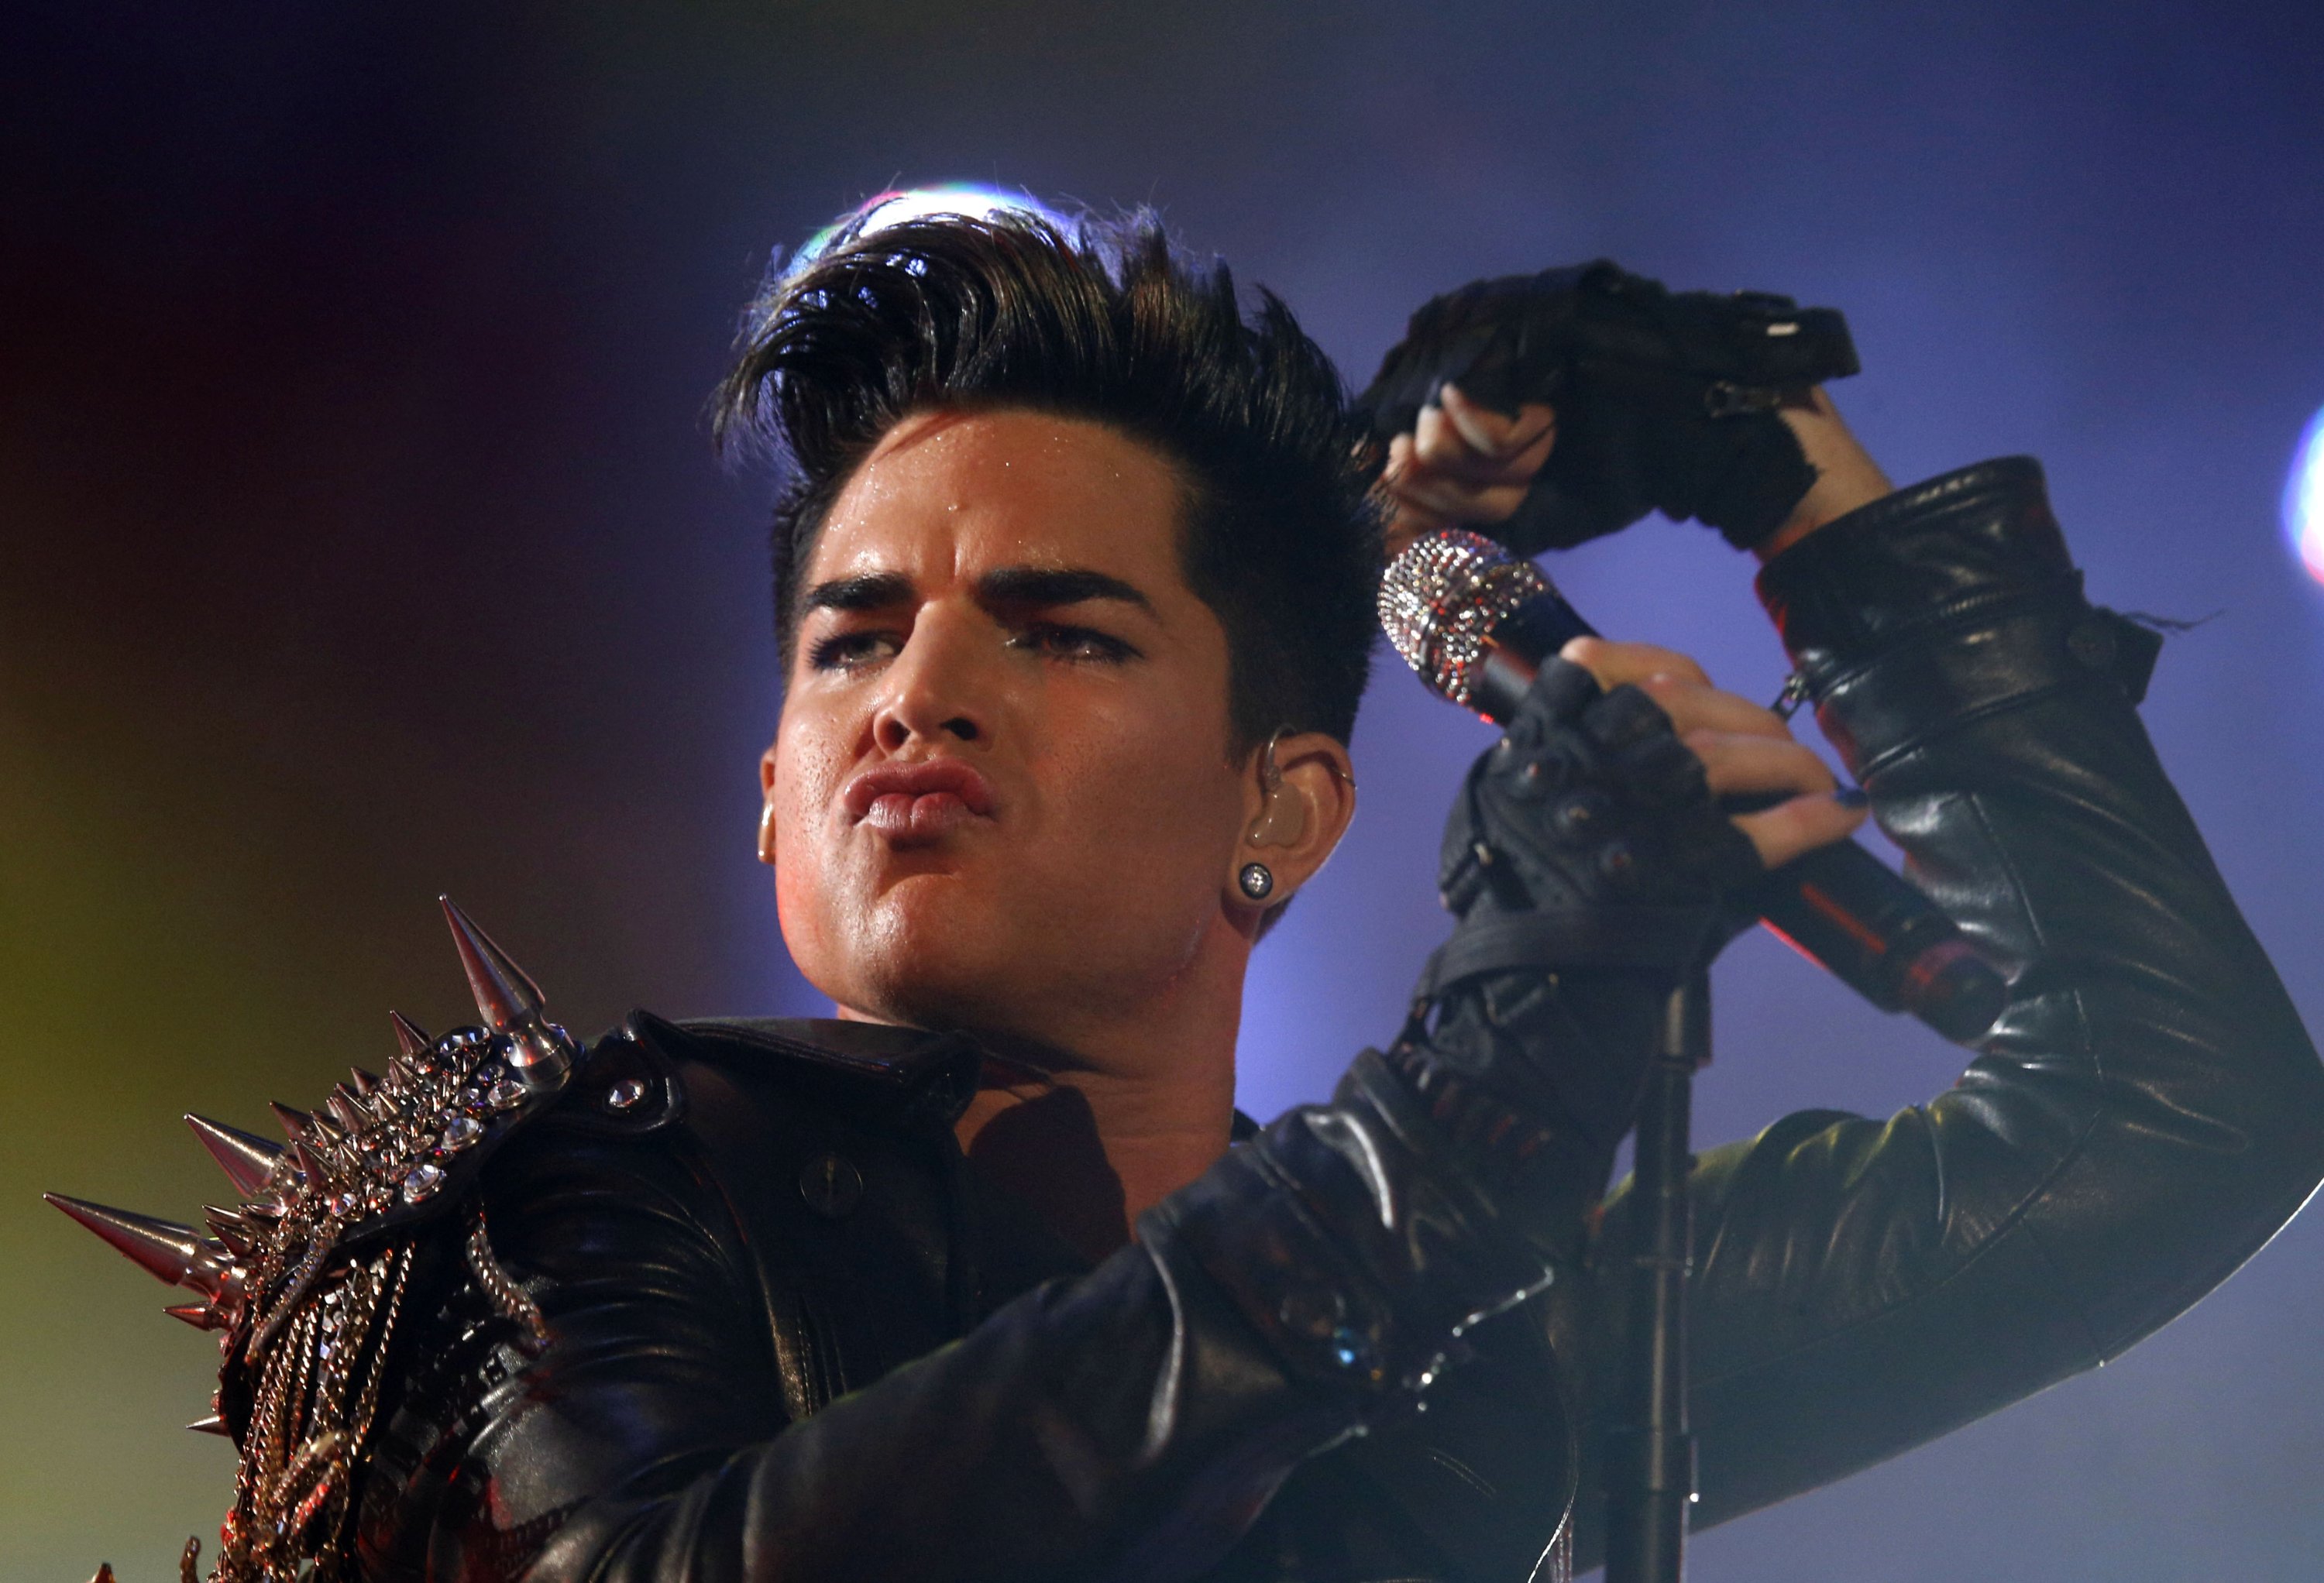 Adam Lambert and the rock group Queen perform in a fan zone during the Euro 2012 soccer championship tournament in Kiev, Ukraine, June 30, 2012. (AP Photo)